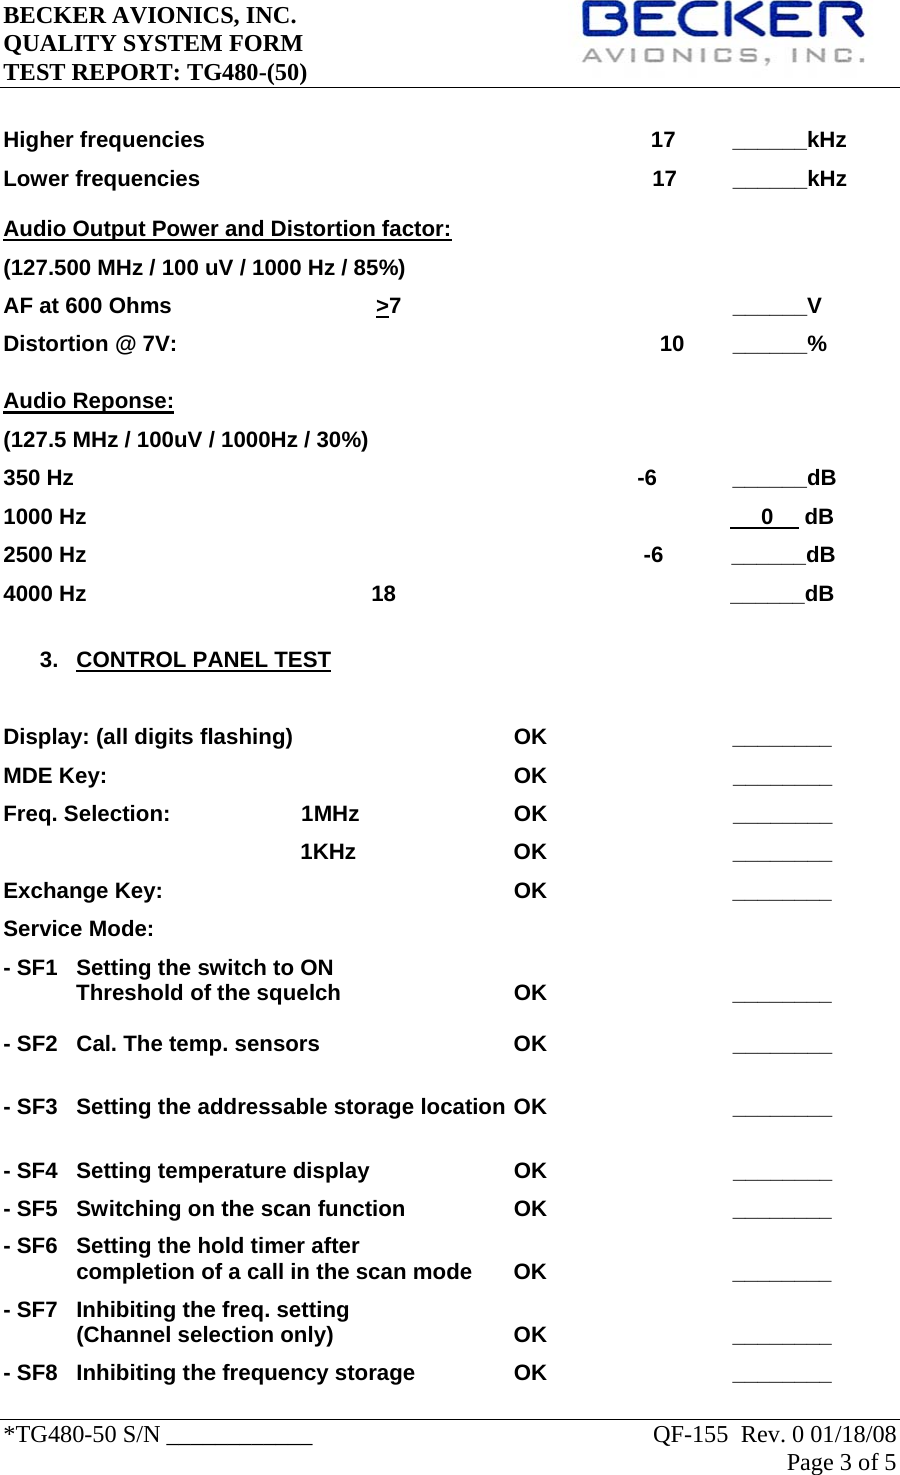 BECKER AVIONICS, INC.     QUALITY SYSTEM FORM TEST REPORT: TG480-(50)   *TG480-50 S/N ____________    QF-155  Rev. 0 01/18/08 Page 3 of 5    Higher frequencies                                                                        17  ______kHz Lower frequencies                                                                         17         ______kHz Audio Output Power and Distortion factor: (127.500 MHz / 100 uV / 1000 Hz / 85%) AF at 600 Ohms                                 &gt;7                                                     ______V Distortion @ 7V:       10 ______%  Audio Reponse: (127.5 MHz / 100uV / 1000Hz / 30%) 350 Hz                                                                                           -6   ______dB 1000 Hz                                                                                                             0     dB 2500 Hz                                                                                          -6           ______dB 4000 Hz                                              18                                                      ______dB  3. CONTROL PANEL TEST  Display: (all digits flashing)    OK   ________ MDE Key:            OK                              ________ Freq. Selection:      1MHz                  OK                              ________                                                 1KHz                  OK                              ________ Exchange Key:     OK   ________ Service Mode: - SF1   Setting the switch to ON Threshold of the squelch      OK      ________  - SF2  Cal. The temp. sensors      OK                              ________   - SF3  Setting the addressable storage location OK                              ________  - SF4  Setting temperature display    OK                              ________ - SF5  Switching on the scan function    OK      ________ - SF6  Setting the hold timer after  completion of a call in the scan mode  OK      ________  - SF7  Inhibiting the freq. setting (Channel selection only)   OK   ________ - SF8  Inhibiting the frequency storage    OK      ________ 